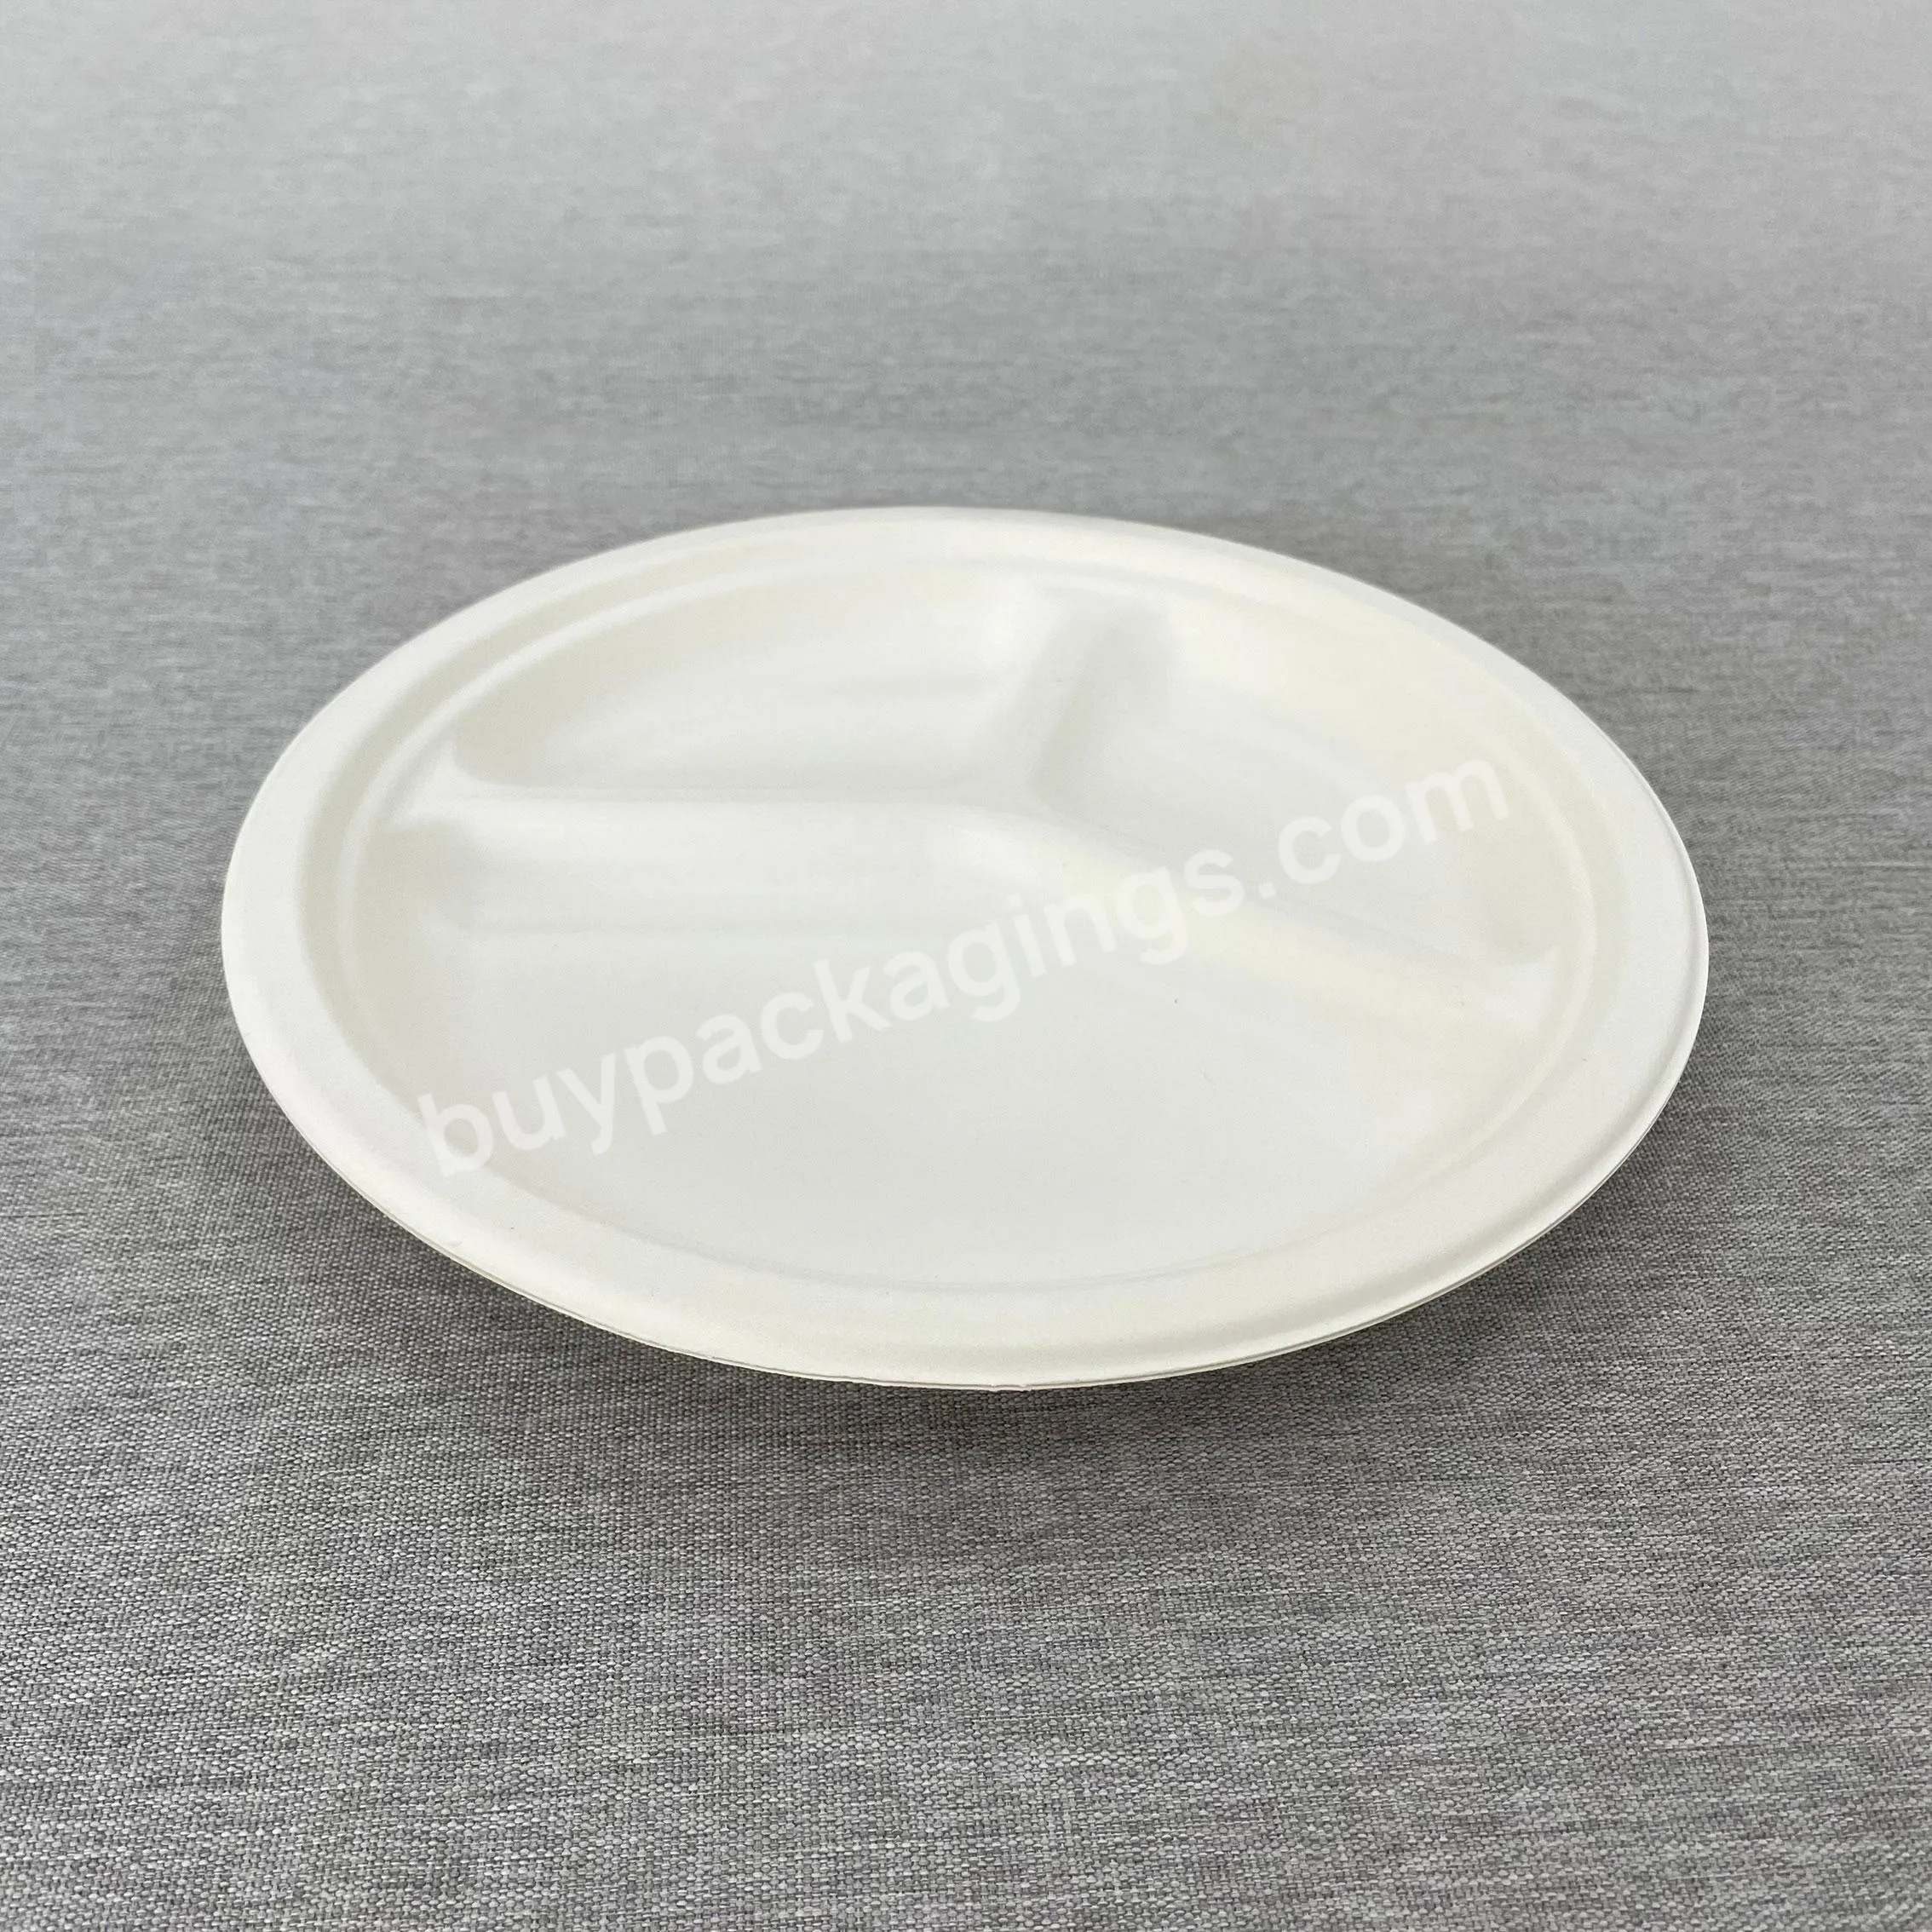 Wholesale Custom Printed Compostable Disposable Christmas Paper Party Supplies Plate Pulp Kidney Dishes - Buy Paper Plate,Paper Plates Party Supplies,Christmas Paper Plates.